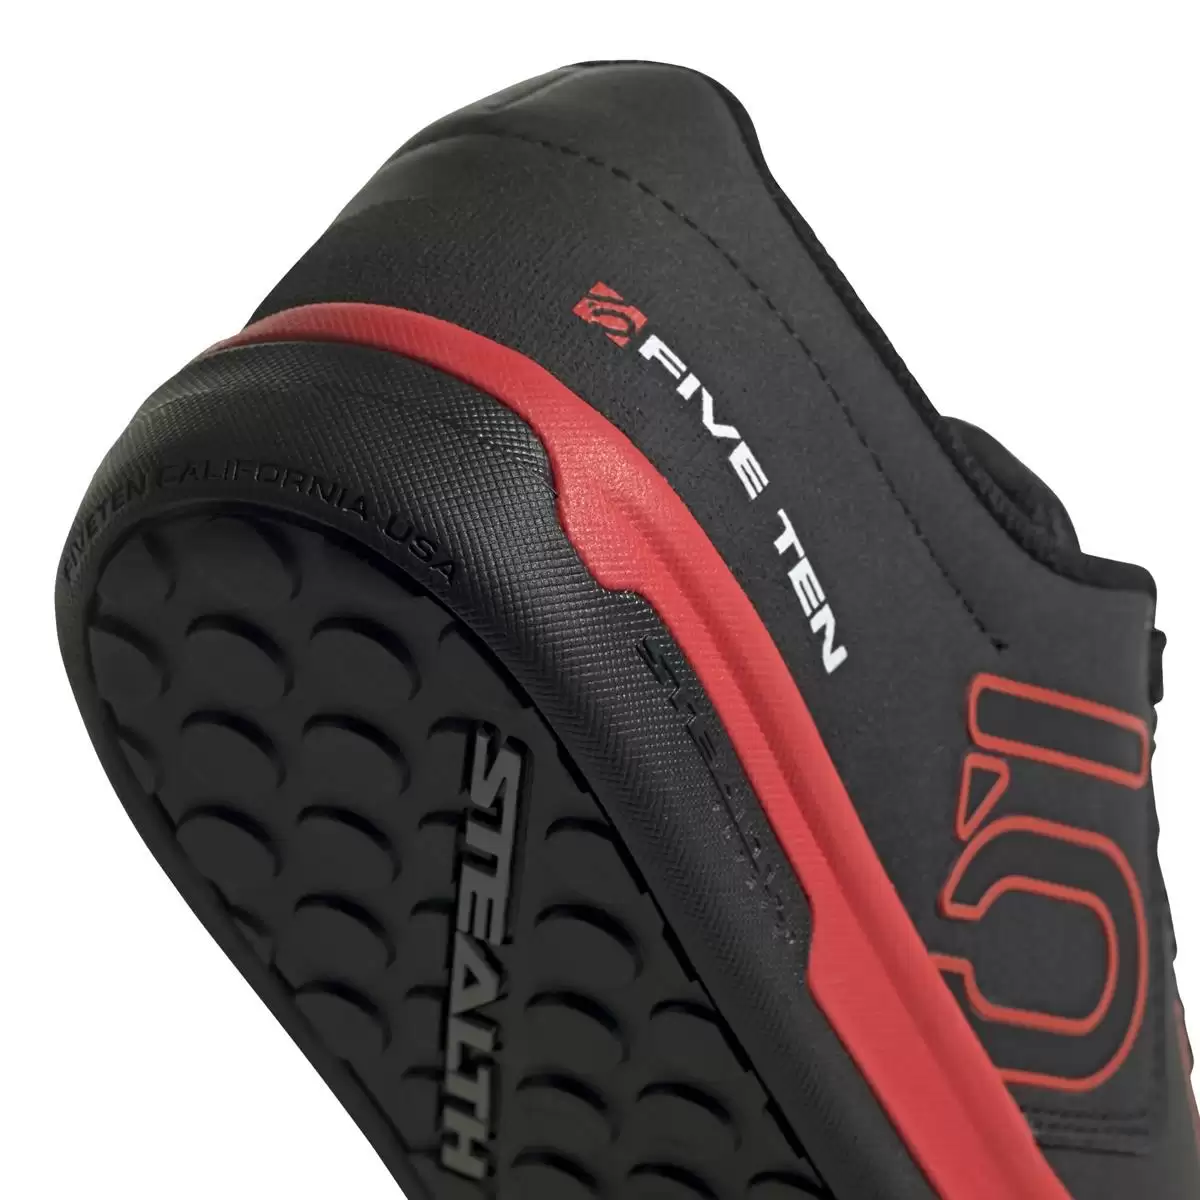 MTB Flat Shoes Freerider Pro Black/Red Size 40 #5